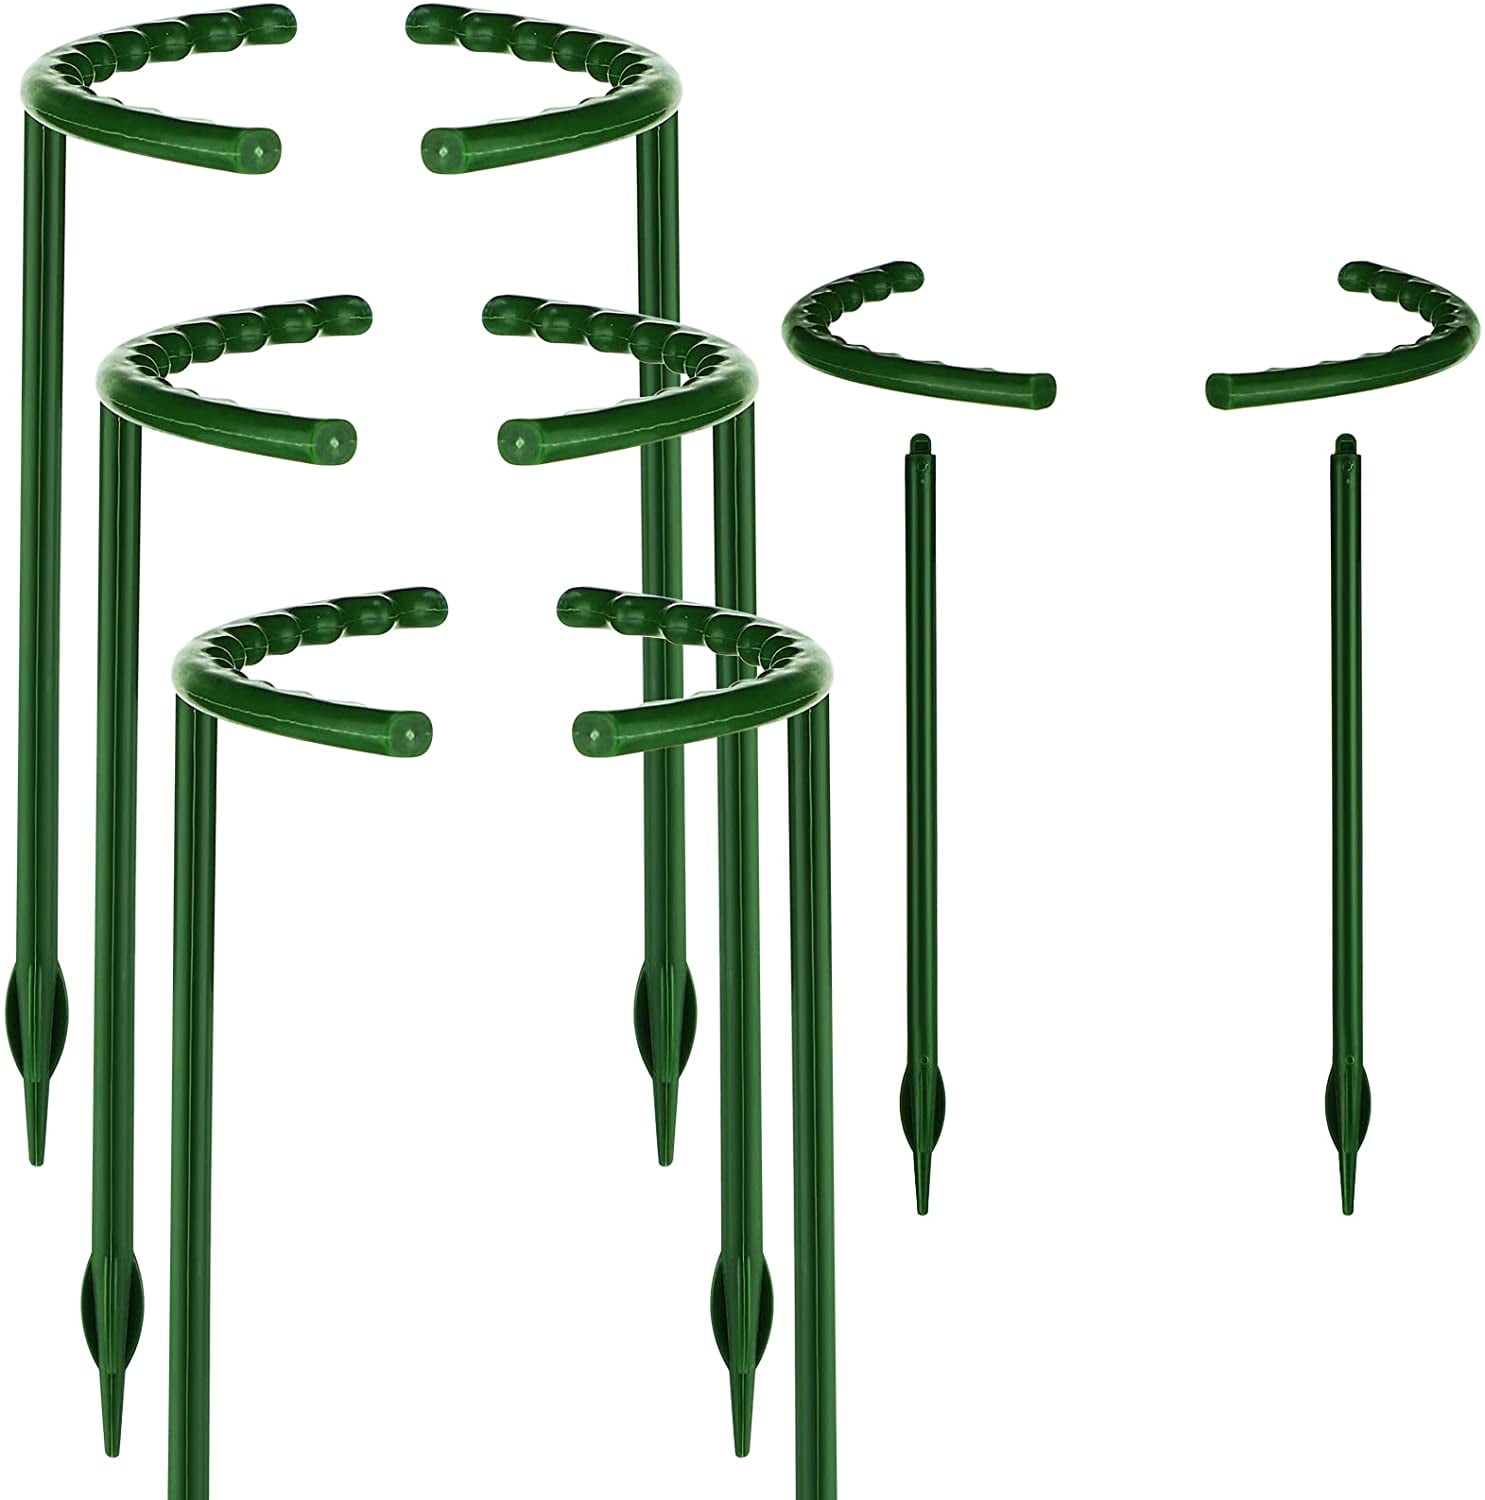 Plant Support Garden Flower Support Stake Half Round Plant Support Ring Plastic Plant Cage Holder Flower Pot Climbing Trellis for Small Plant Flower Vegetable 5.7 x 9.8 Inch,6 Pieces 